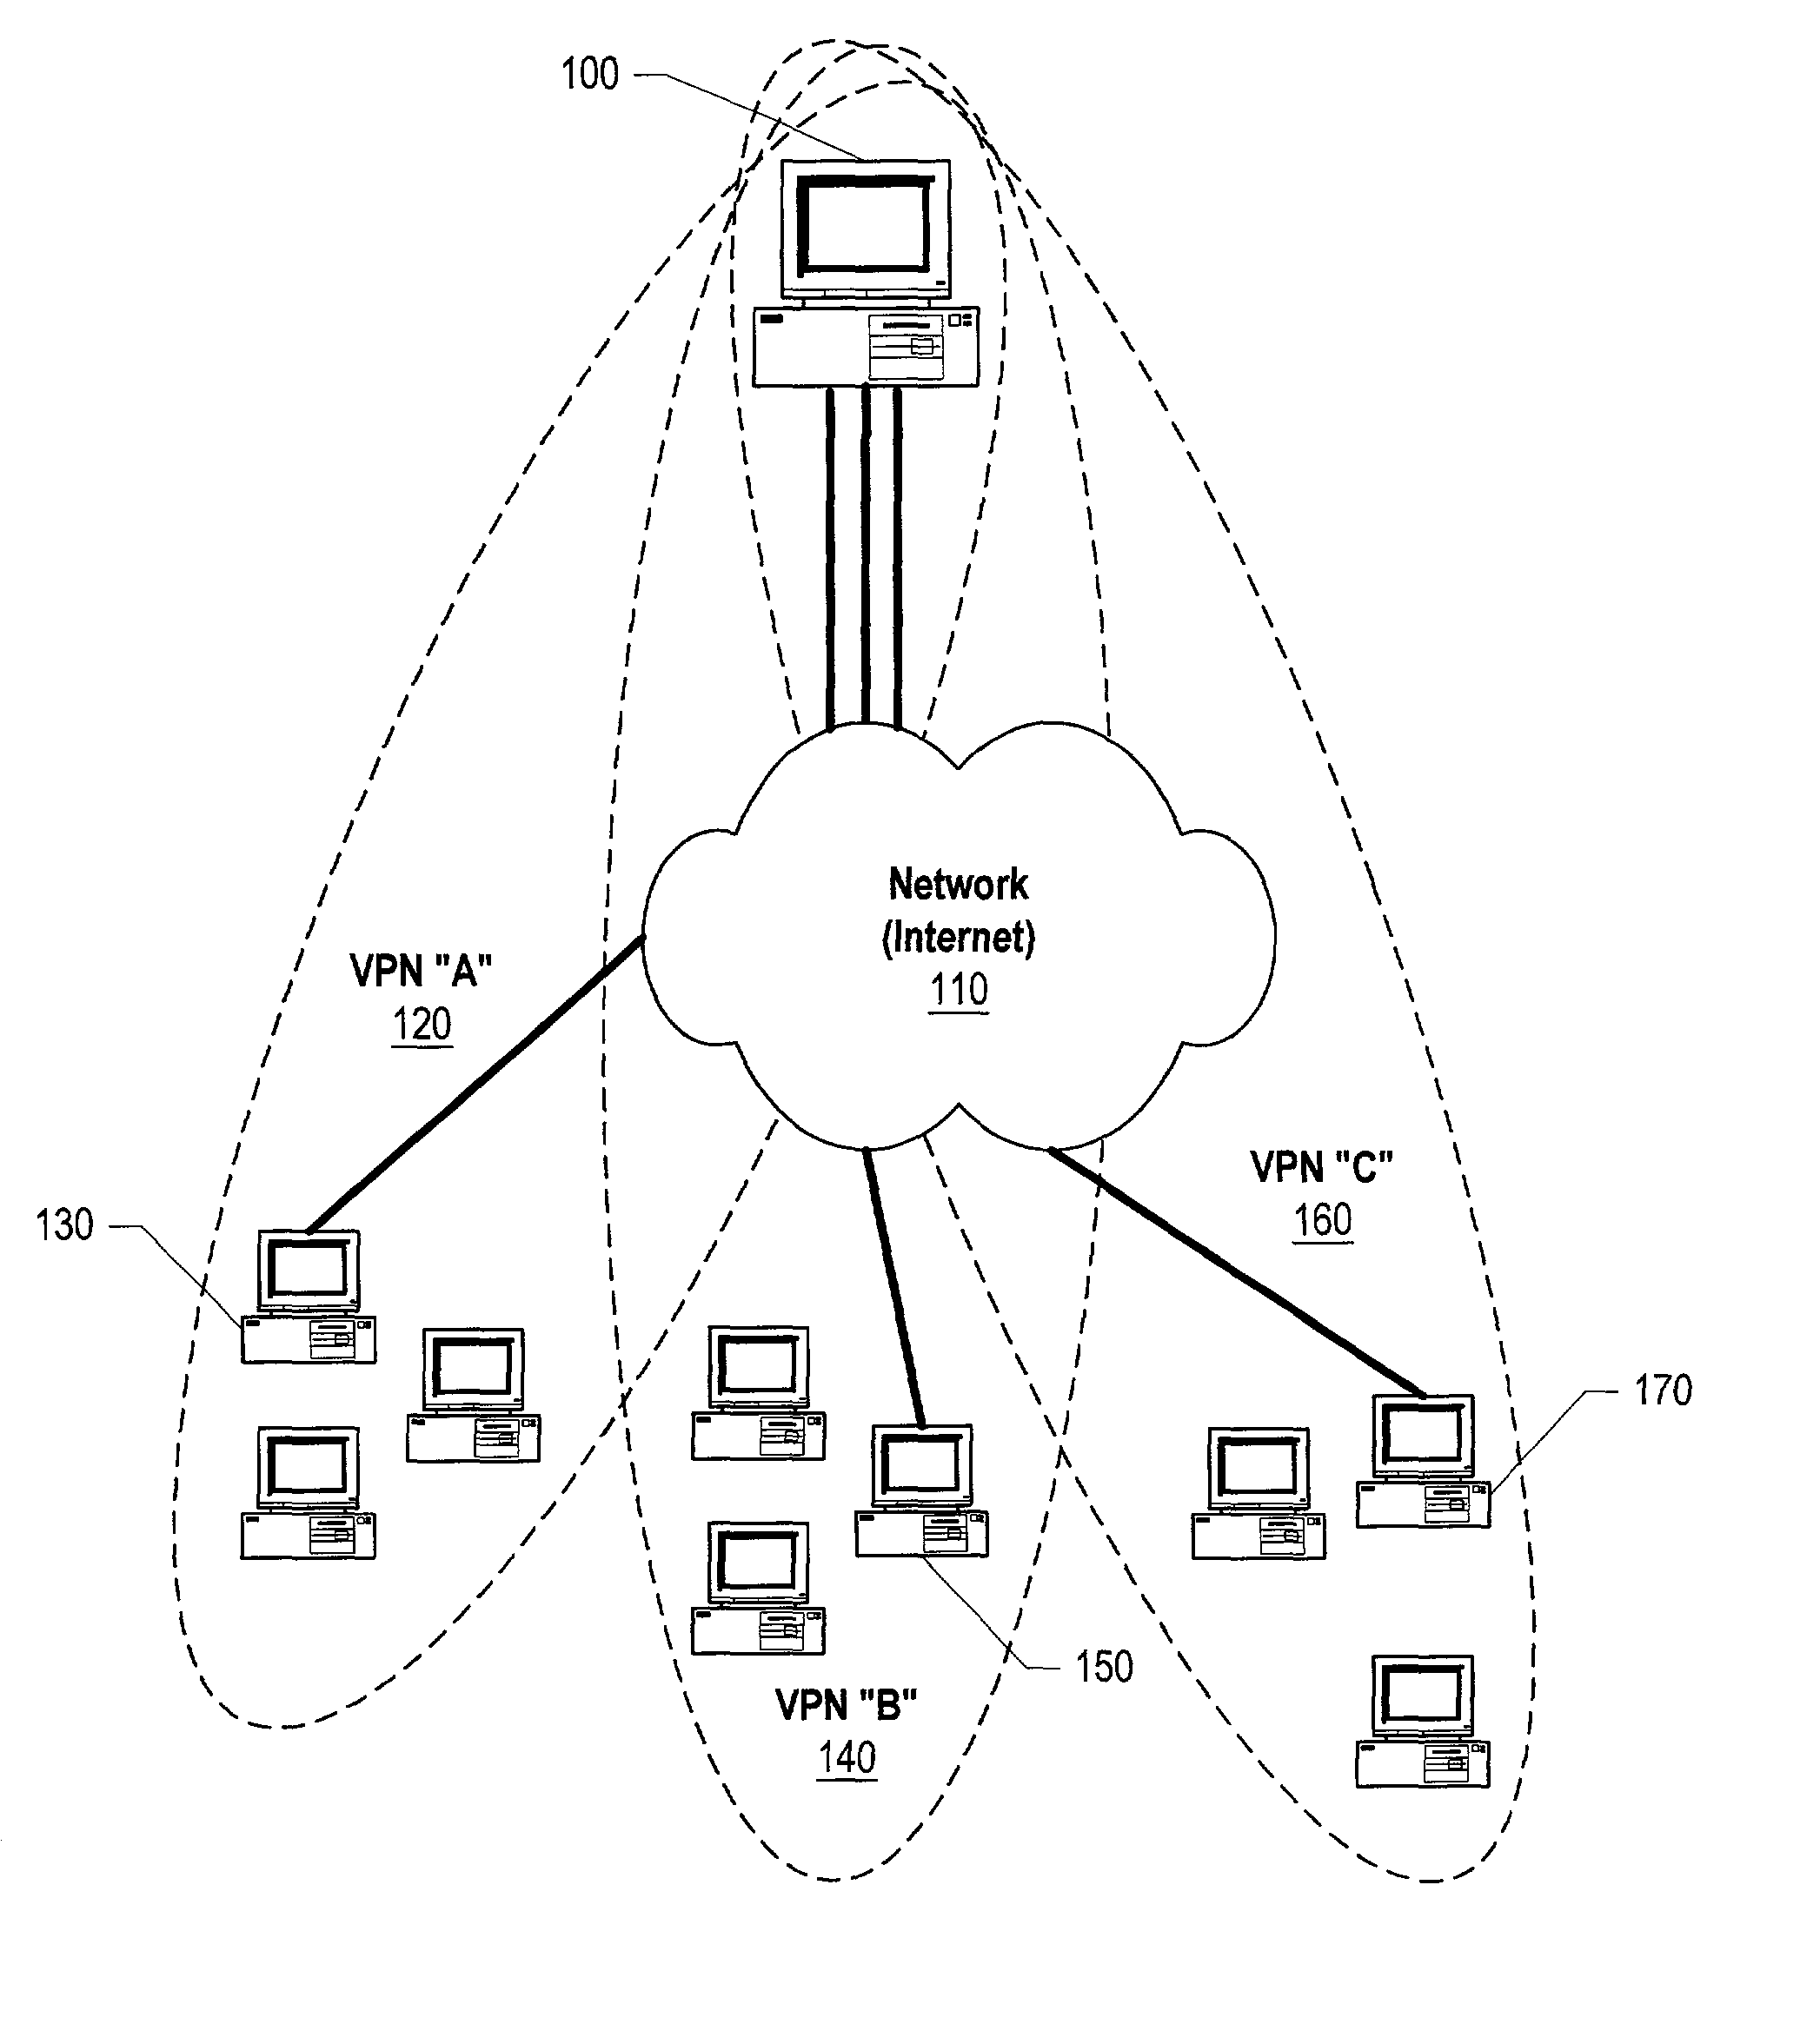 System and method for dynamically determining CRL locations and access methods